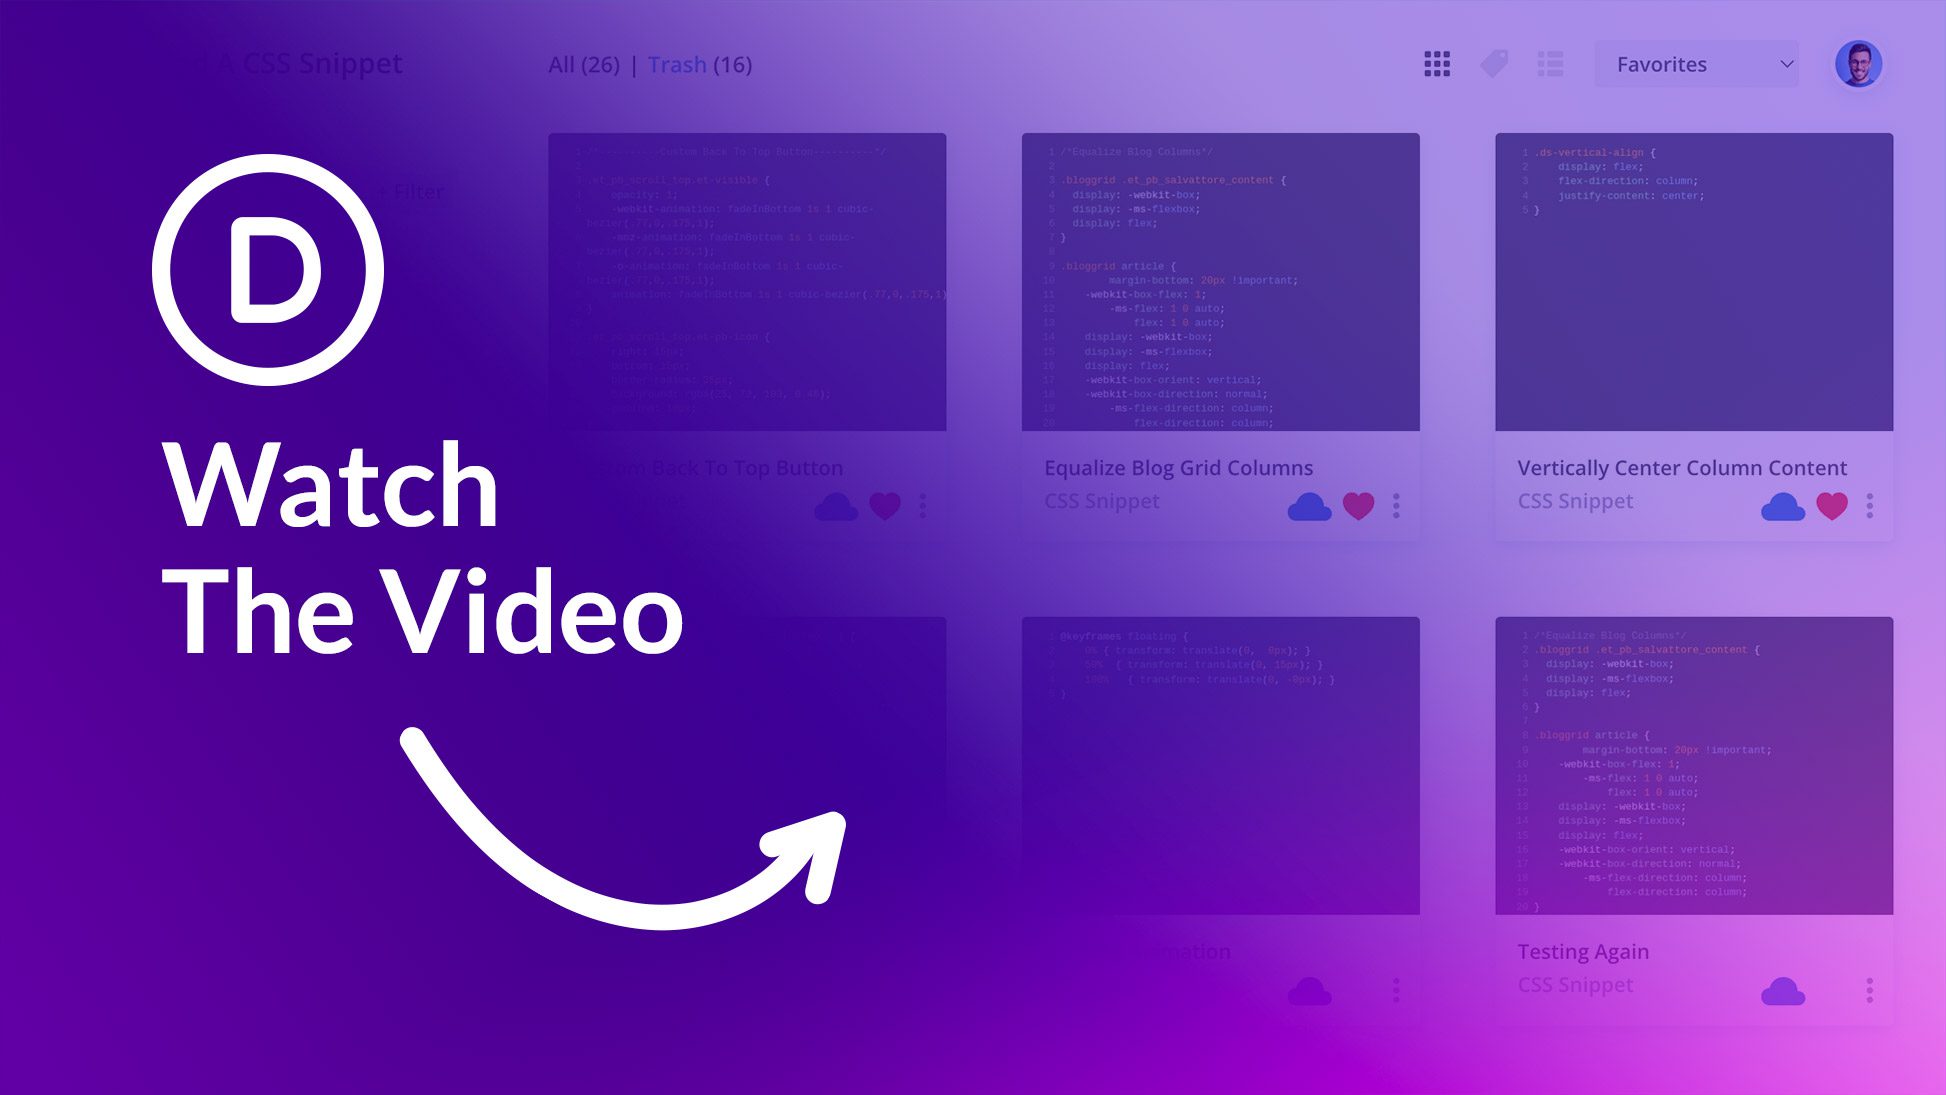 Introducing Divi Code Snippets! Save Your Favorite Code Snippets And Sync Them To The Cloud